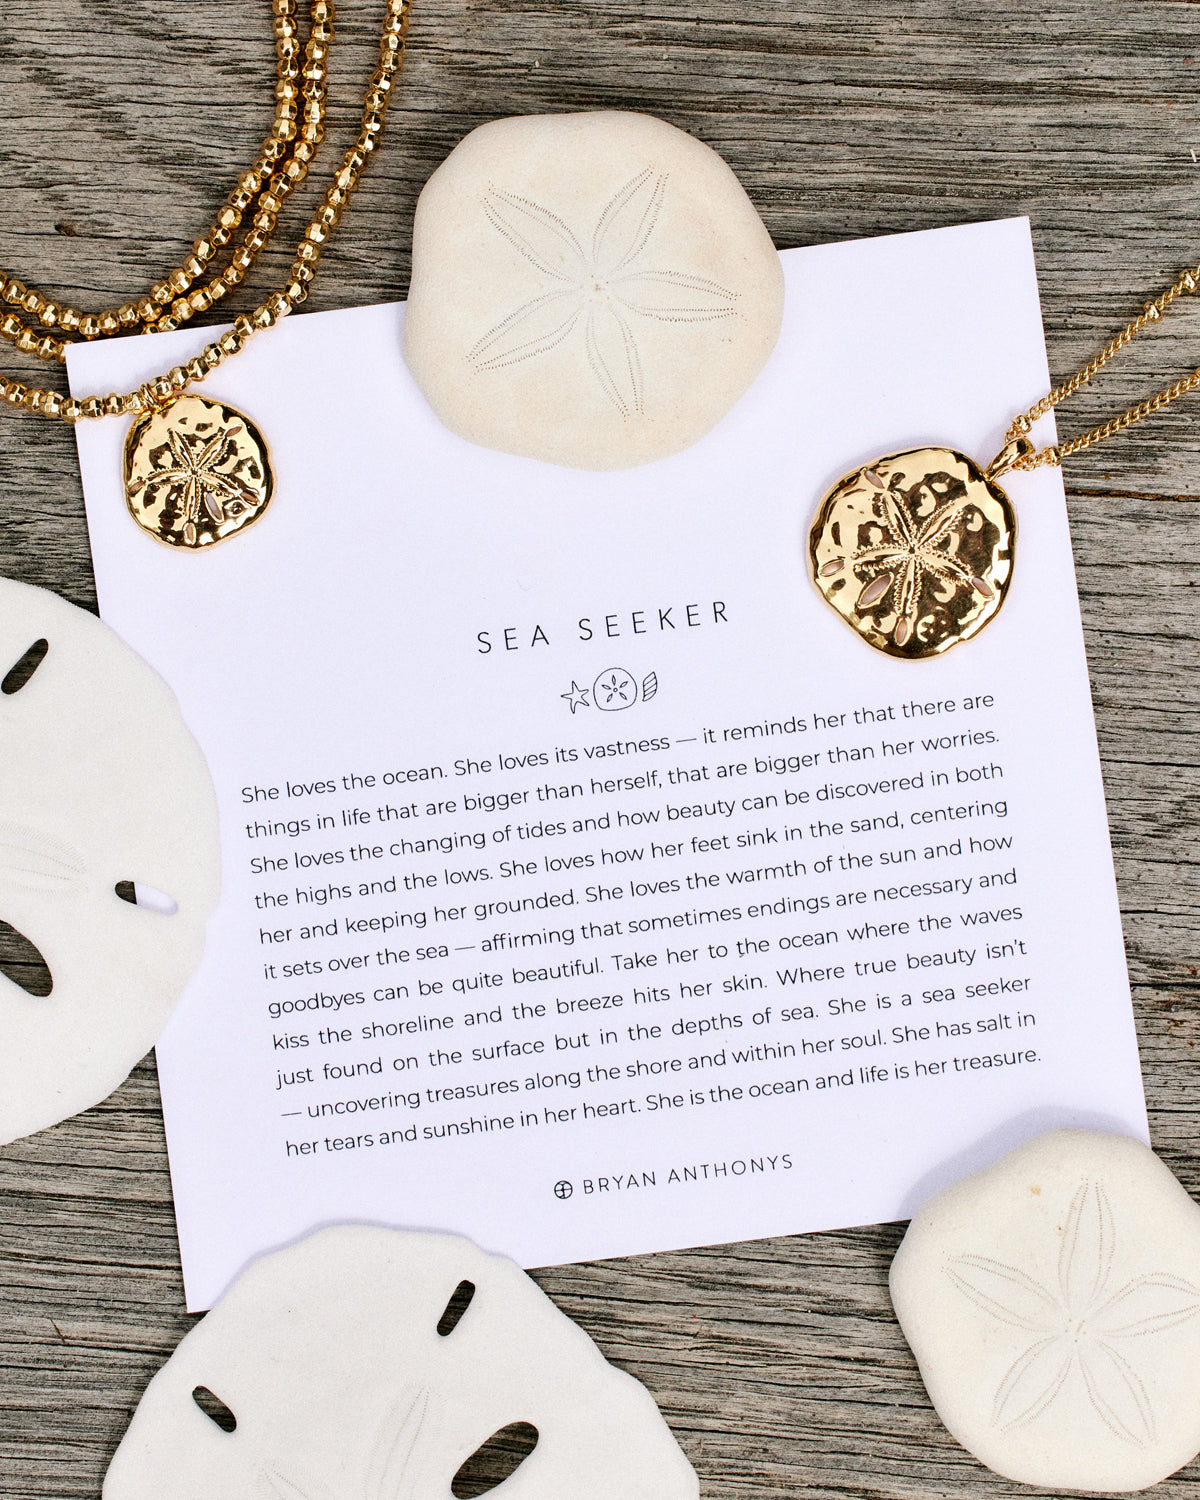 Sea Seeker Pendant Necklace and Tri-Beaded Gold Sea Seeker Necklace with Meaning Description Card and Sand Dollars